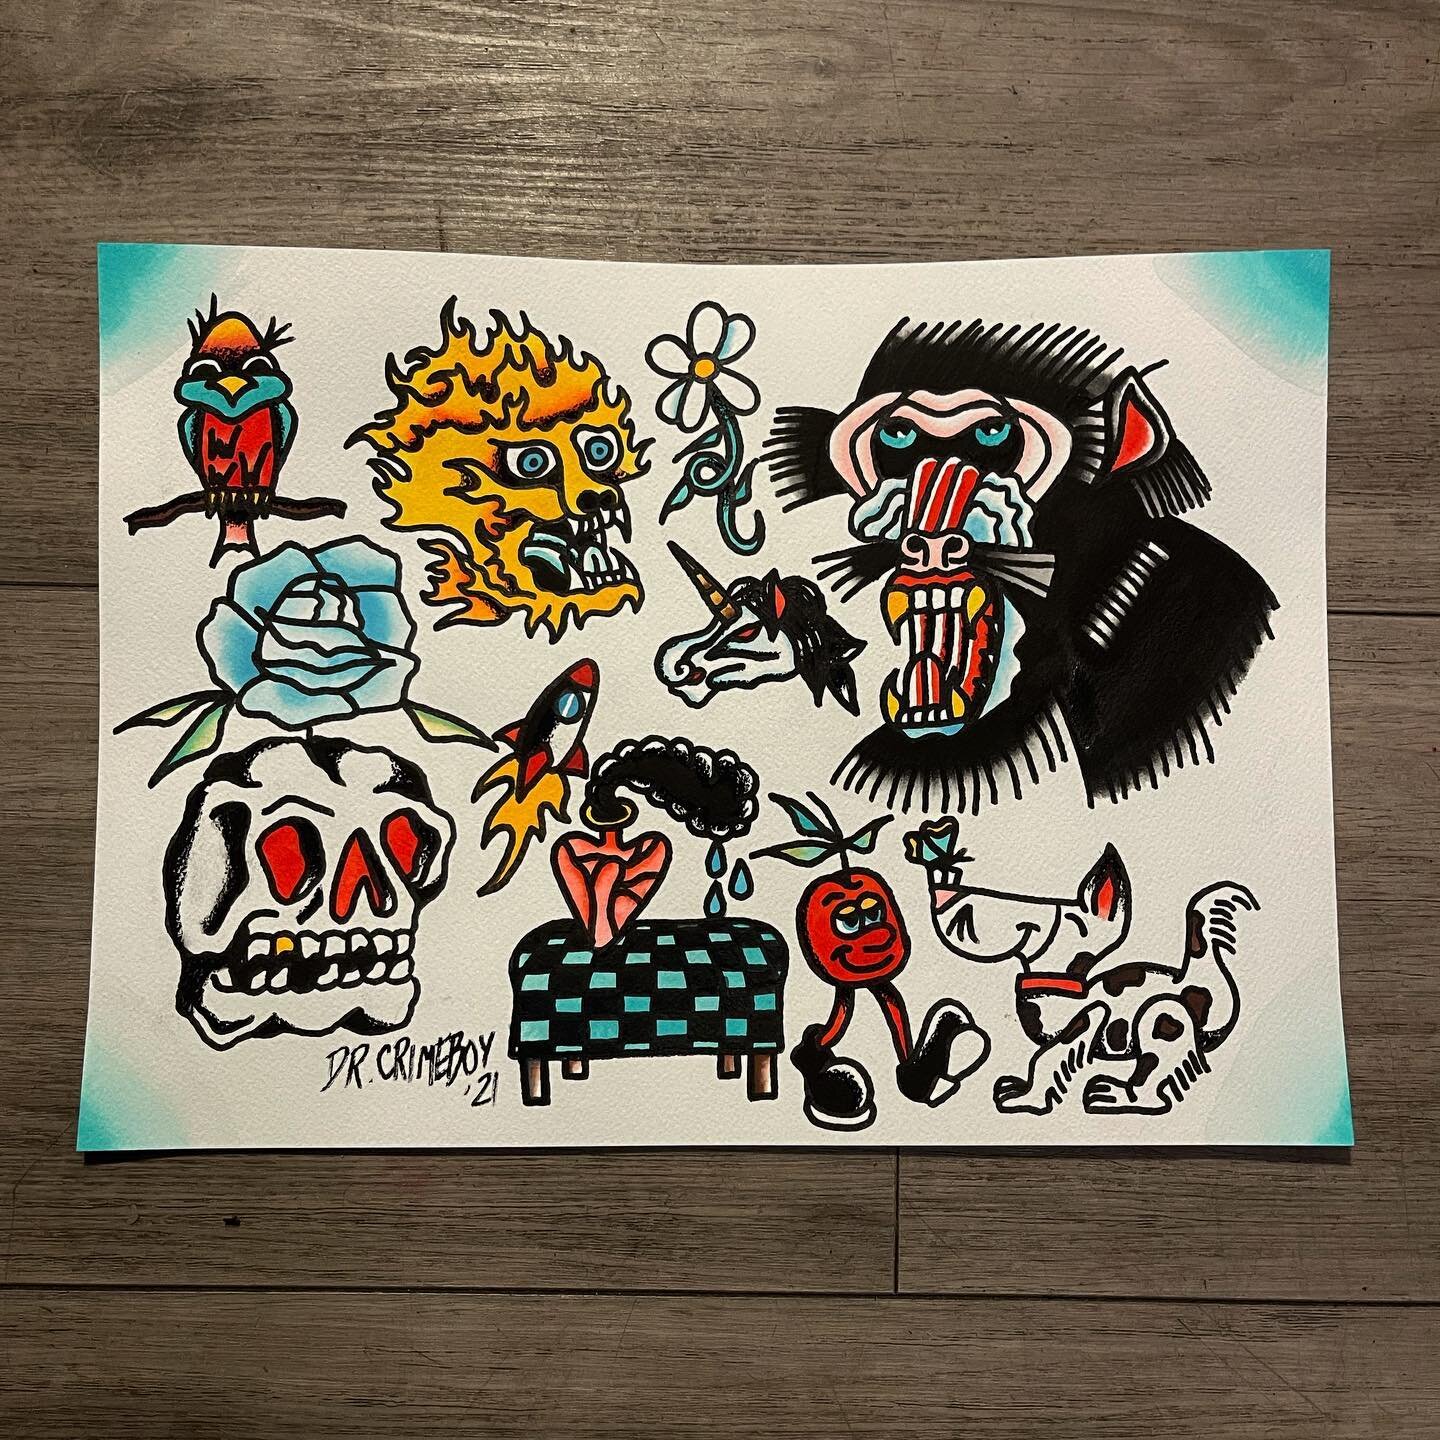 Hi new flash thank you !
#tattooflash #tradworkers #flashsheet #americantraditional #bright_and_bold #paperworkers #thepaperworkers #flashtattoo @saidanddonetattoo #traditionalbangers